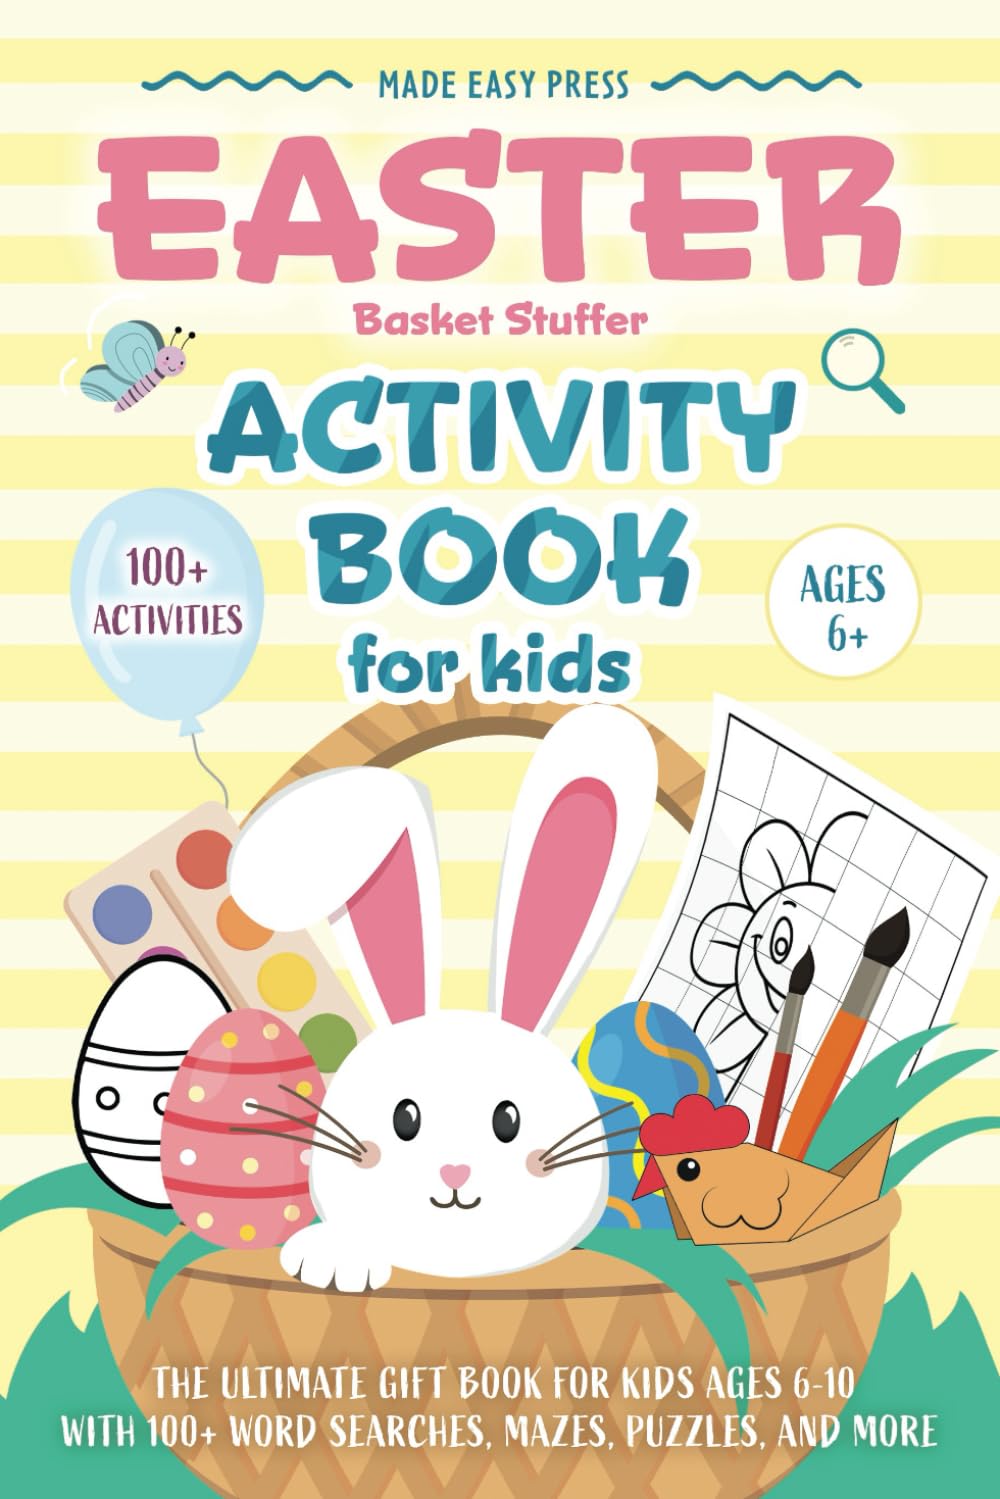 Easter Basket Stuffer Activity Book for Kids: The Ultimate Gift Book for Kids Ages 6-10 With 100+ Word Searches, Mazes, Puzzles, and More (Easter Gift Ideas for Boys and Girls)